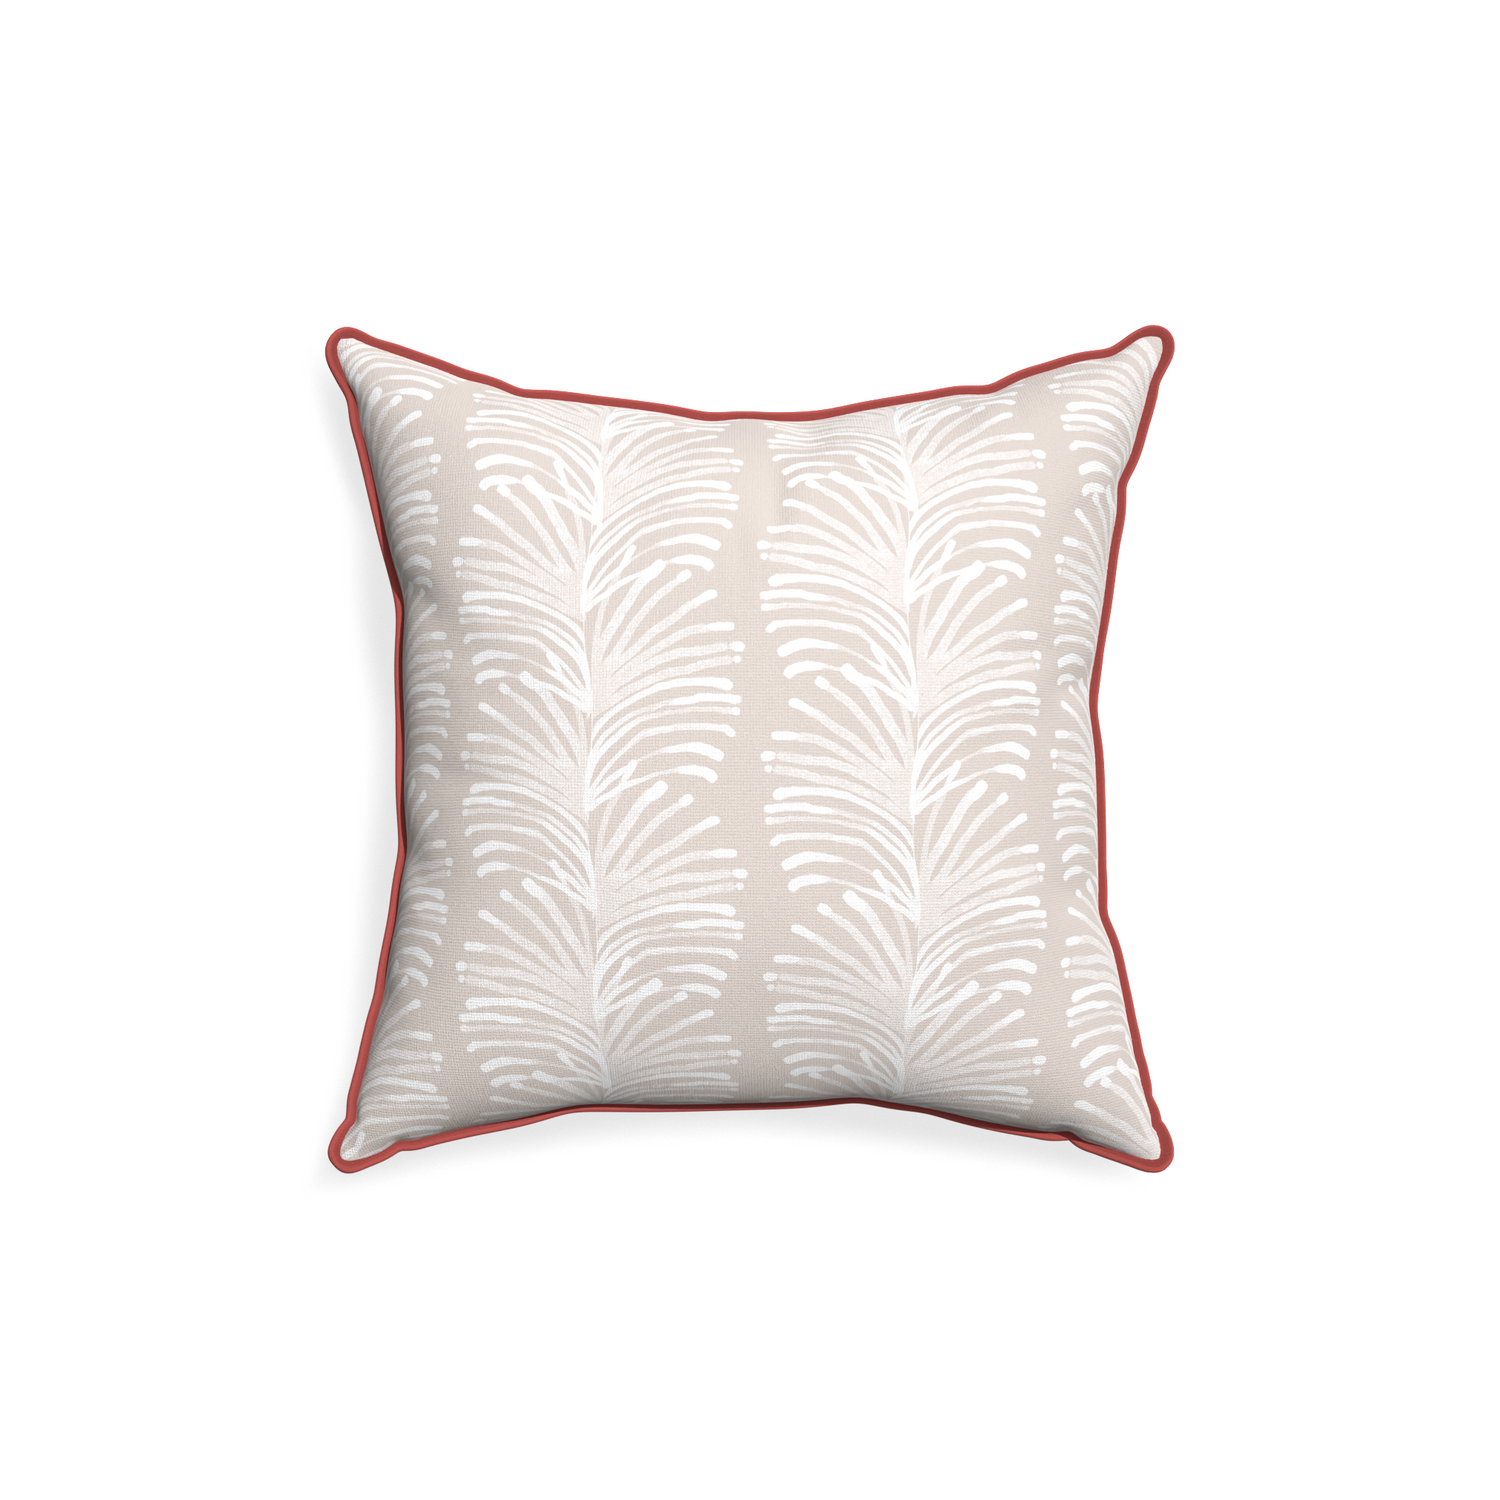 18-square emma sand custom pillow with c piping on white background